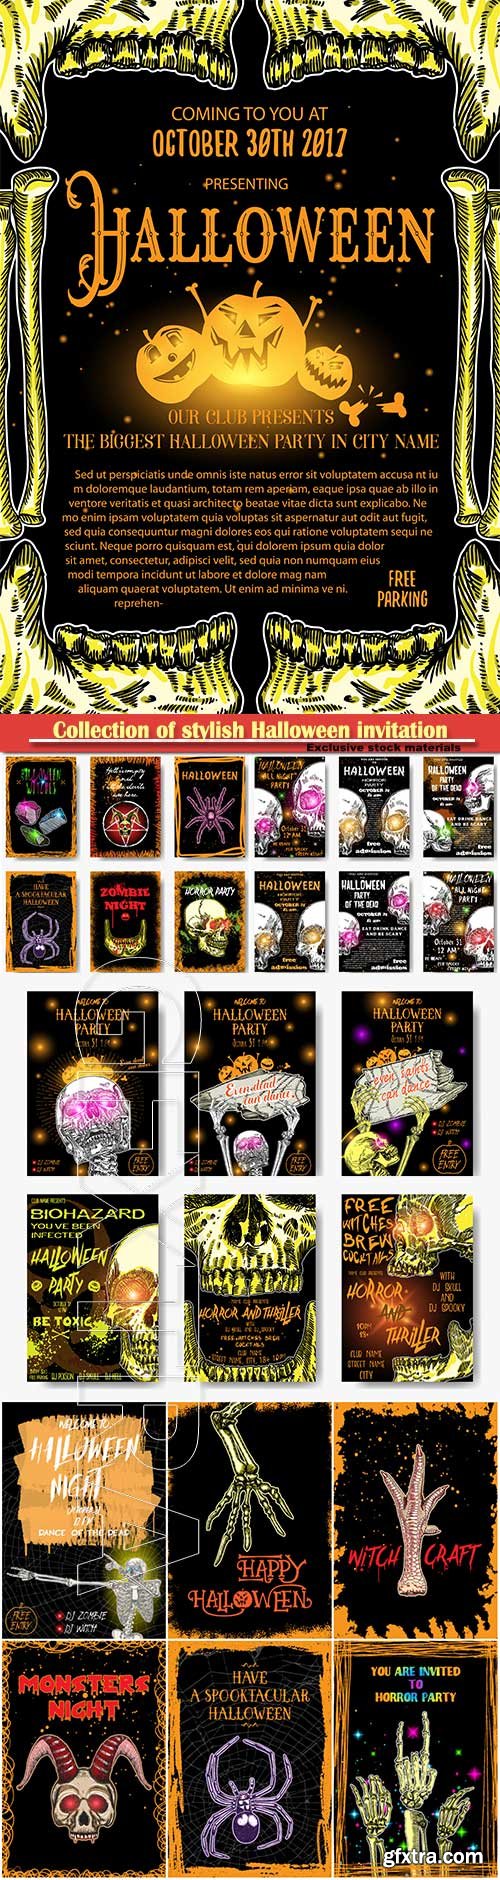 Collection of stylish Halloween invitation posters and cards, hand drawn Halloween greeting flayers templates